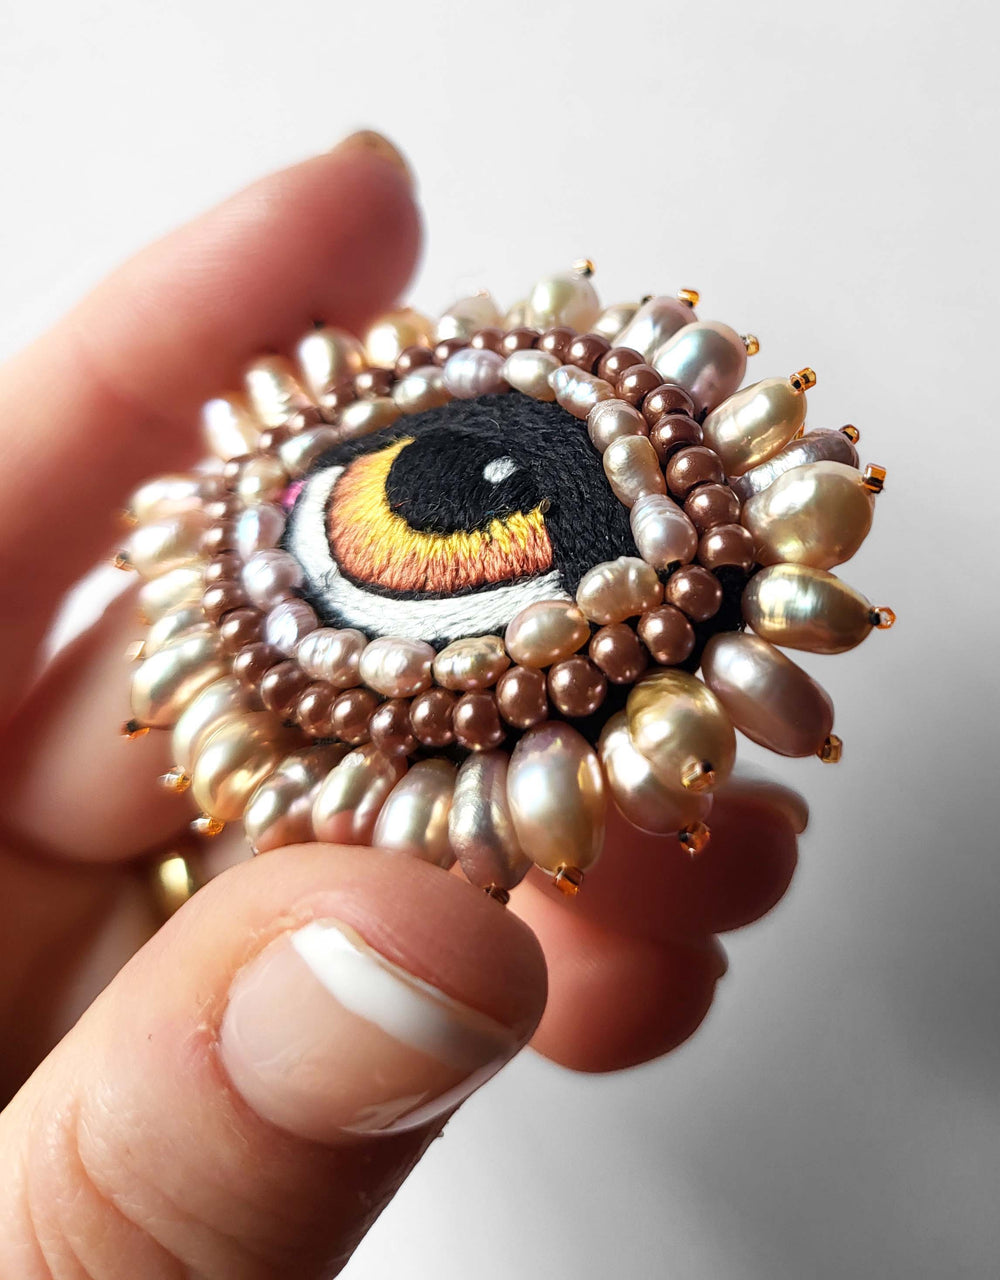 BAROQUE EYE BROOCH ON YOUR ROSE 